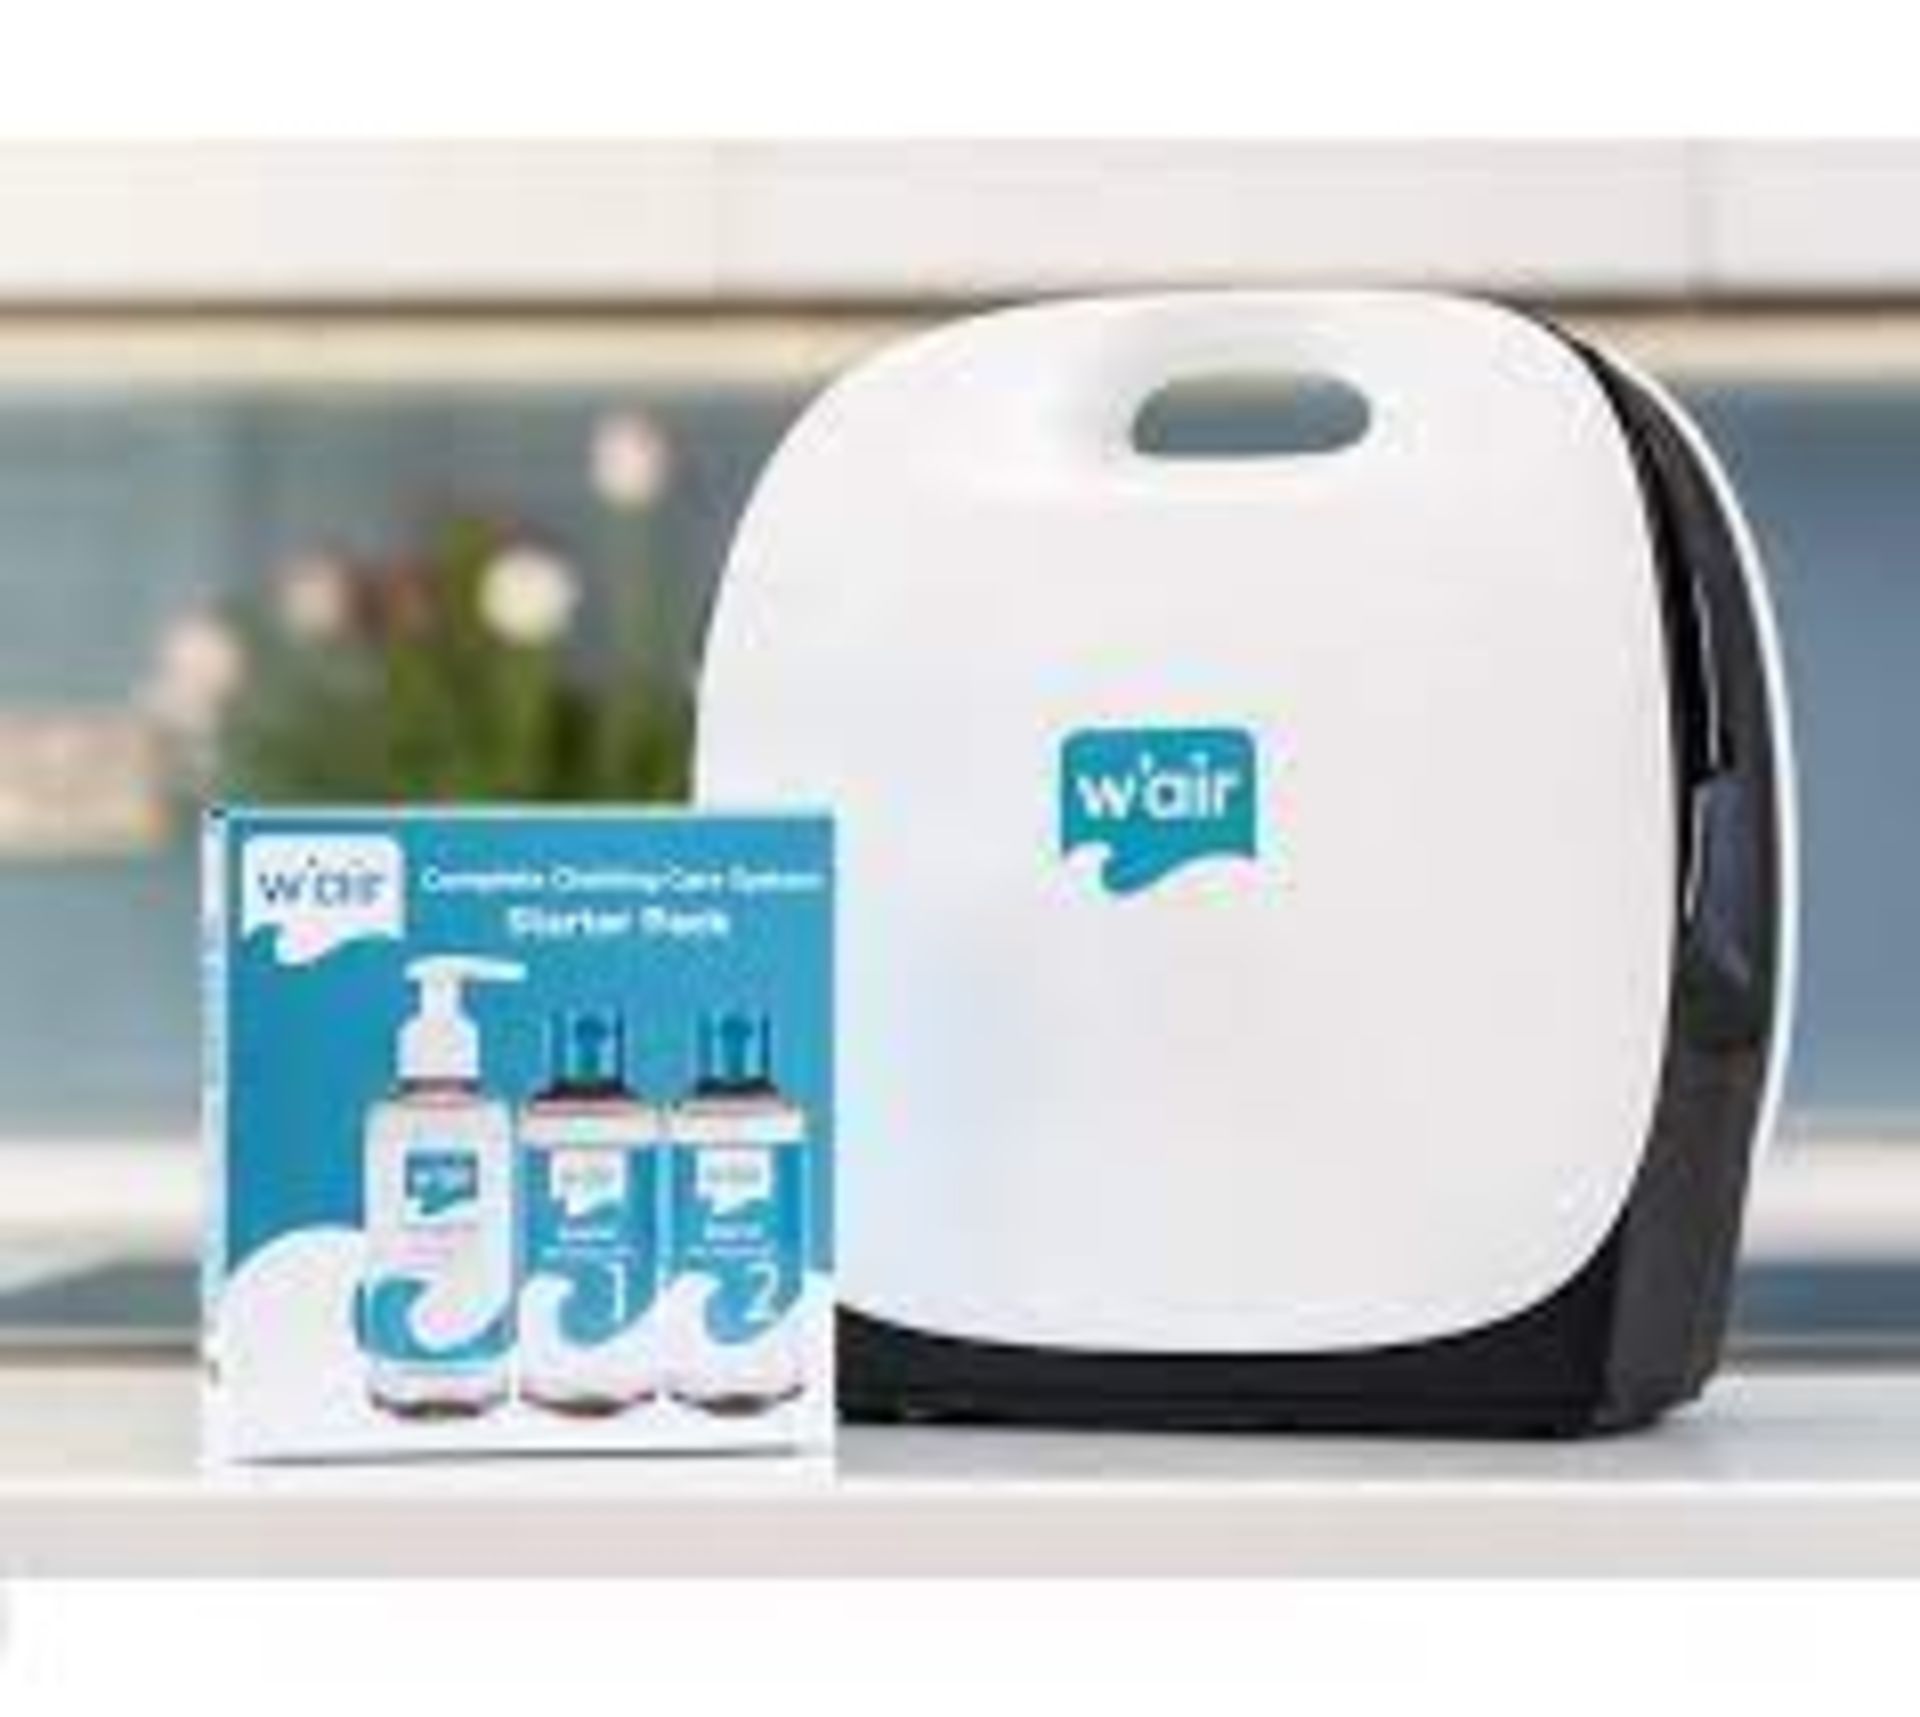 100 X BRAND NEW W'AIR SNEAKER CLEANING SYSTEMS RRP £299, The w'air uses hydrodynamic technology